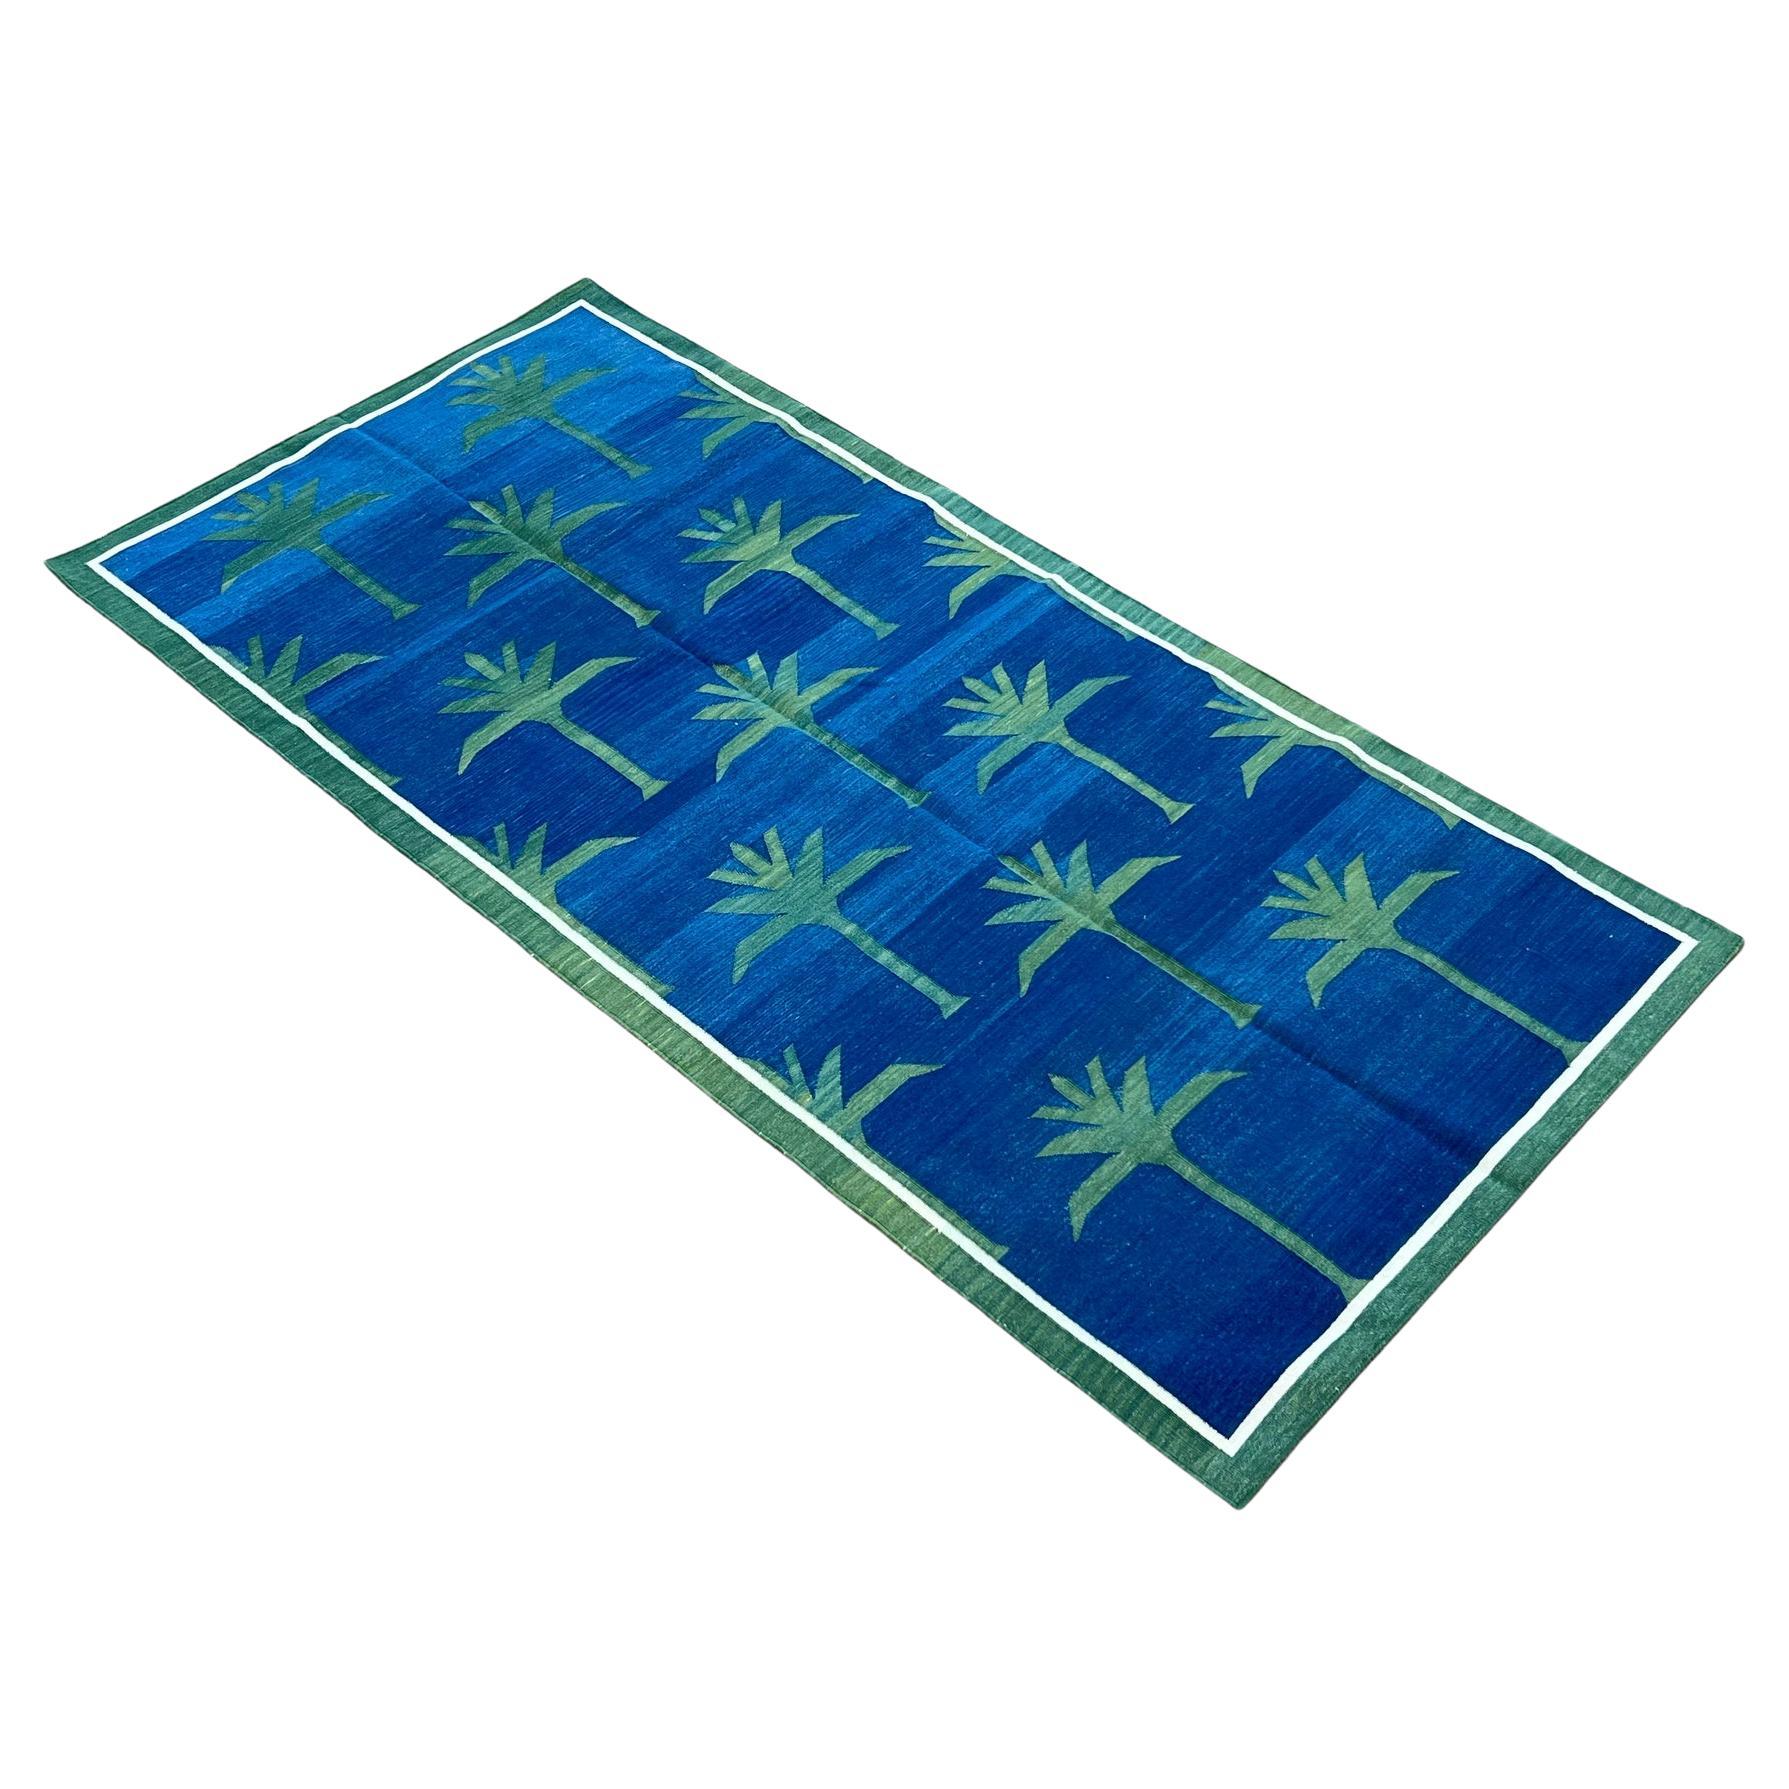 Handmade Cotton Area Flat Weave Rug, Indigo Blue, Green Palm Tree Indian Dhurrie For Sale